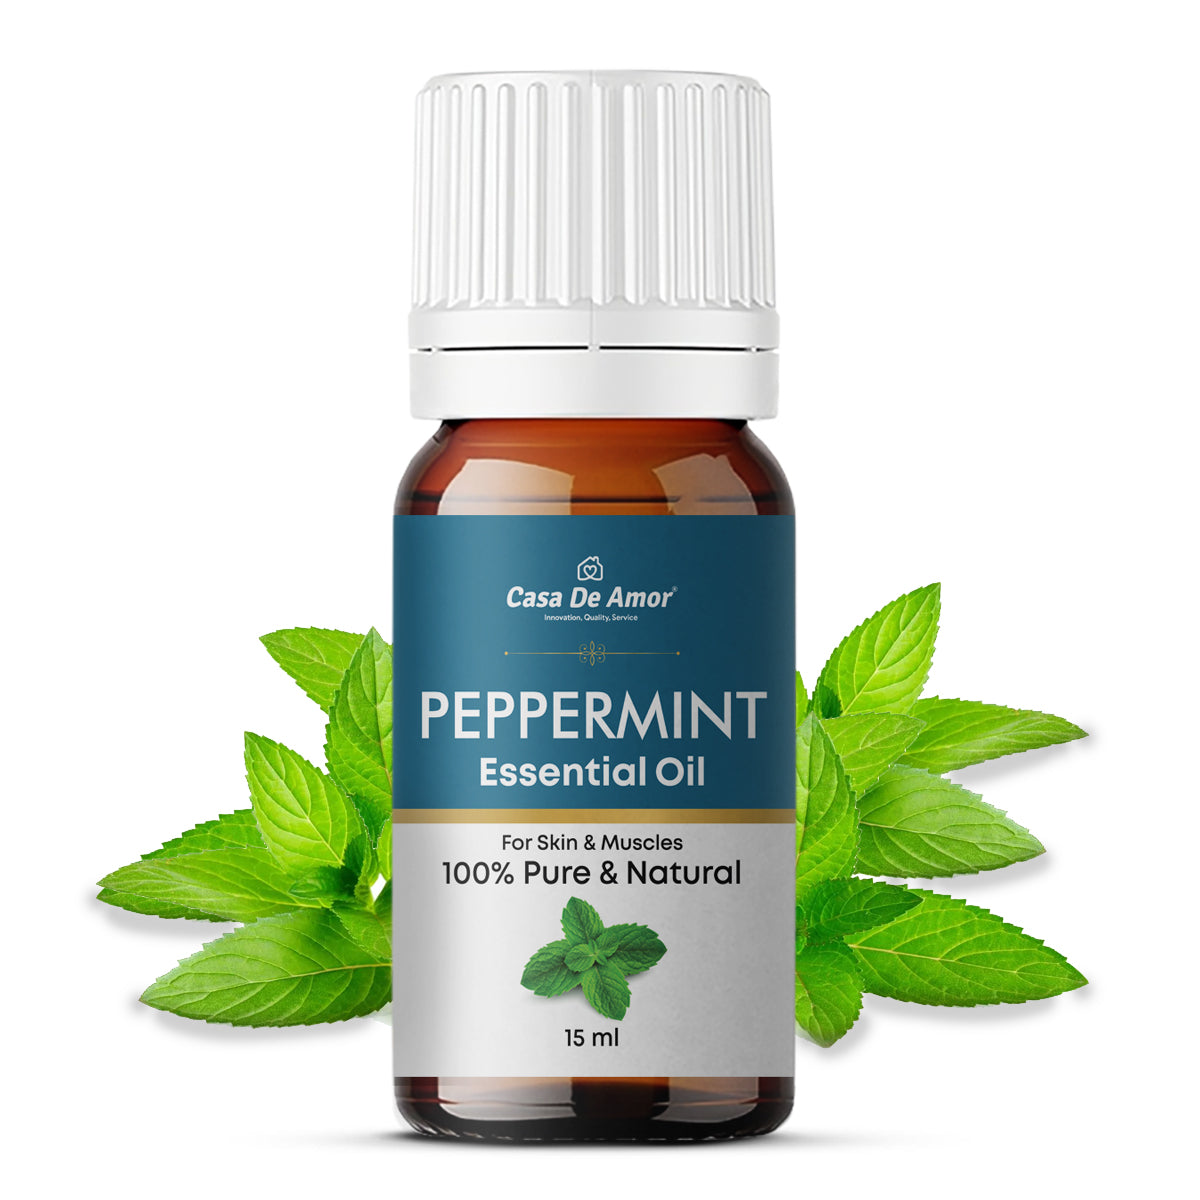 Casa De Amor Peppermint Oil,Natural Ideal For Use In Aromatherapy For Skin & Muscles-15 ml